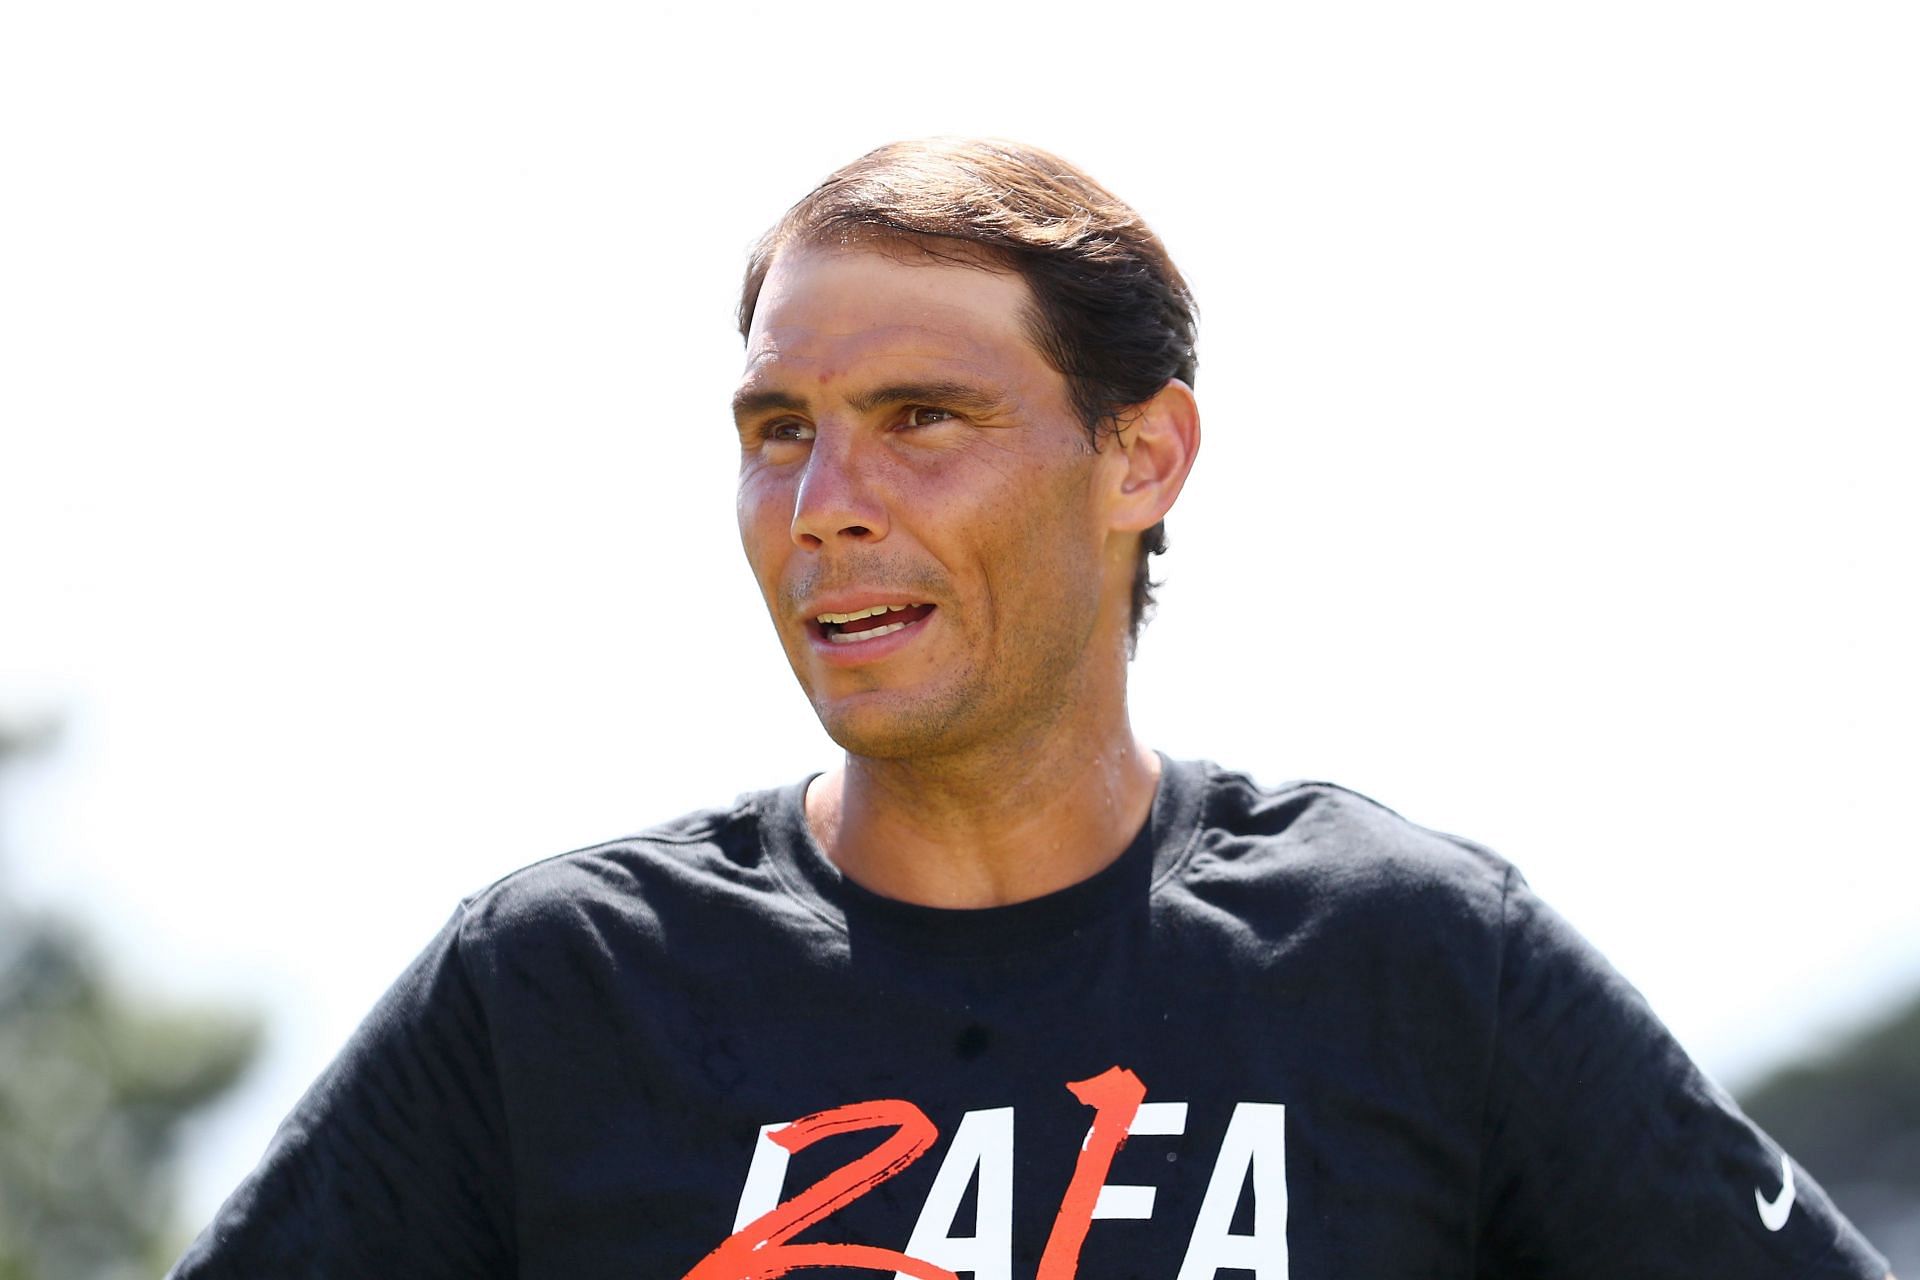 Rafael Nadal appeared in a recent documentary about Real Madrid